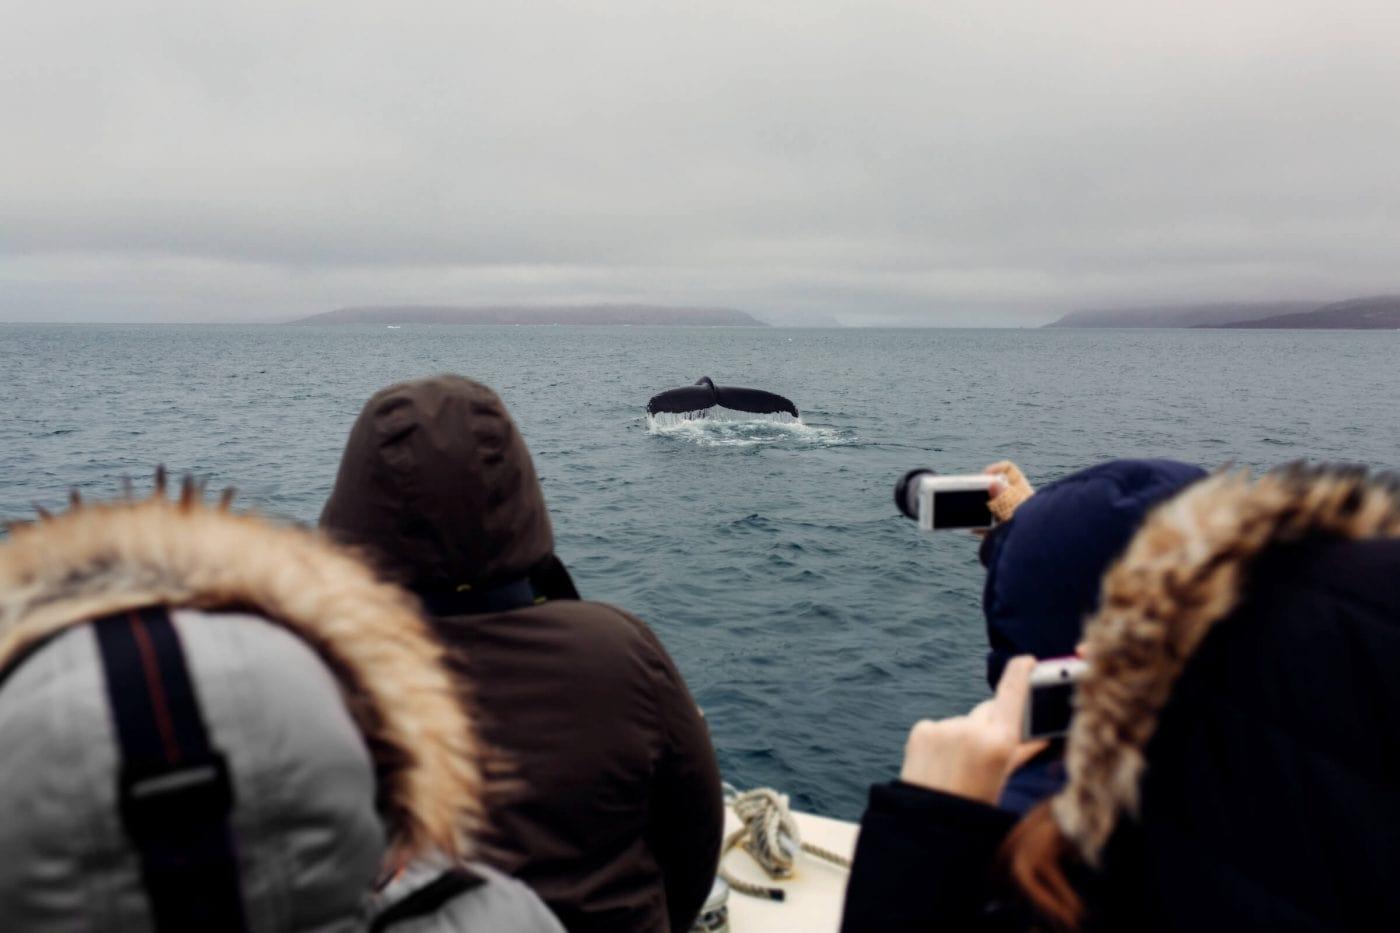 Humpback whale spotted on a Whale Safari in the Nuuk Fjord. Photo by Rebecca Gustafsson